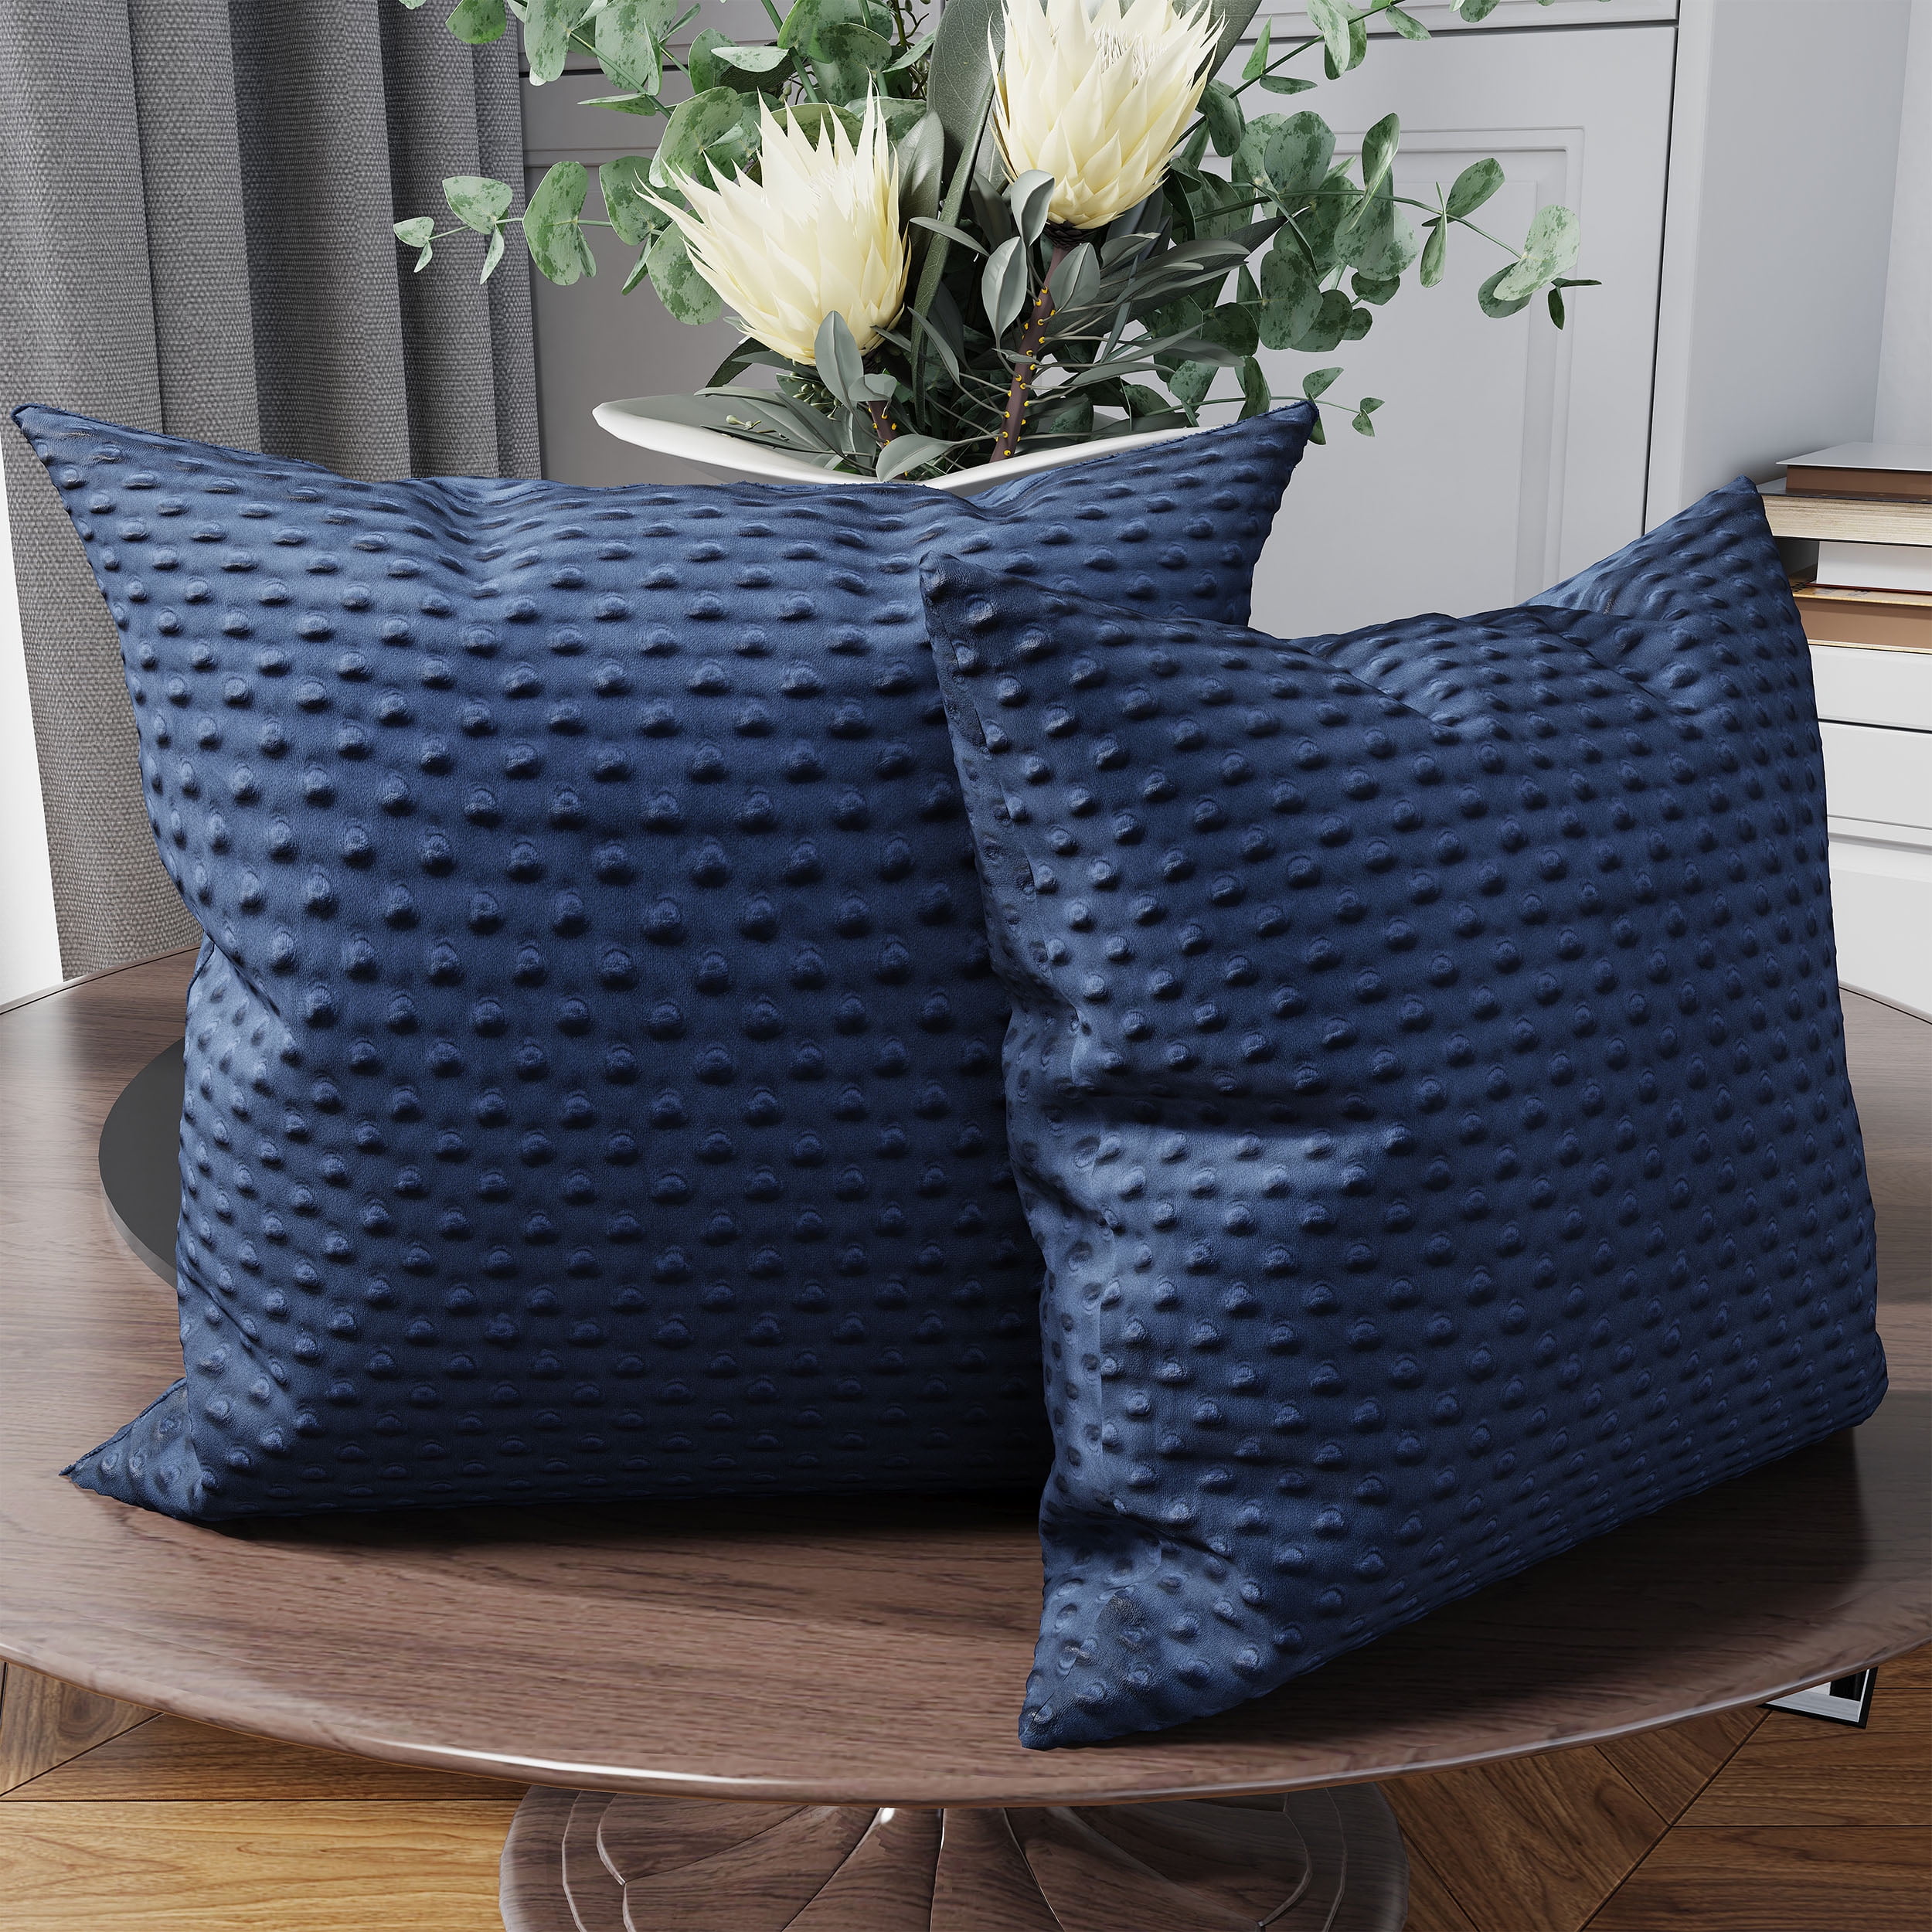 Plush Velvet soft touch Cushion Covers in Sofa Pillow Soft Cushions piped detail 